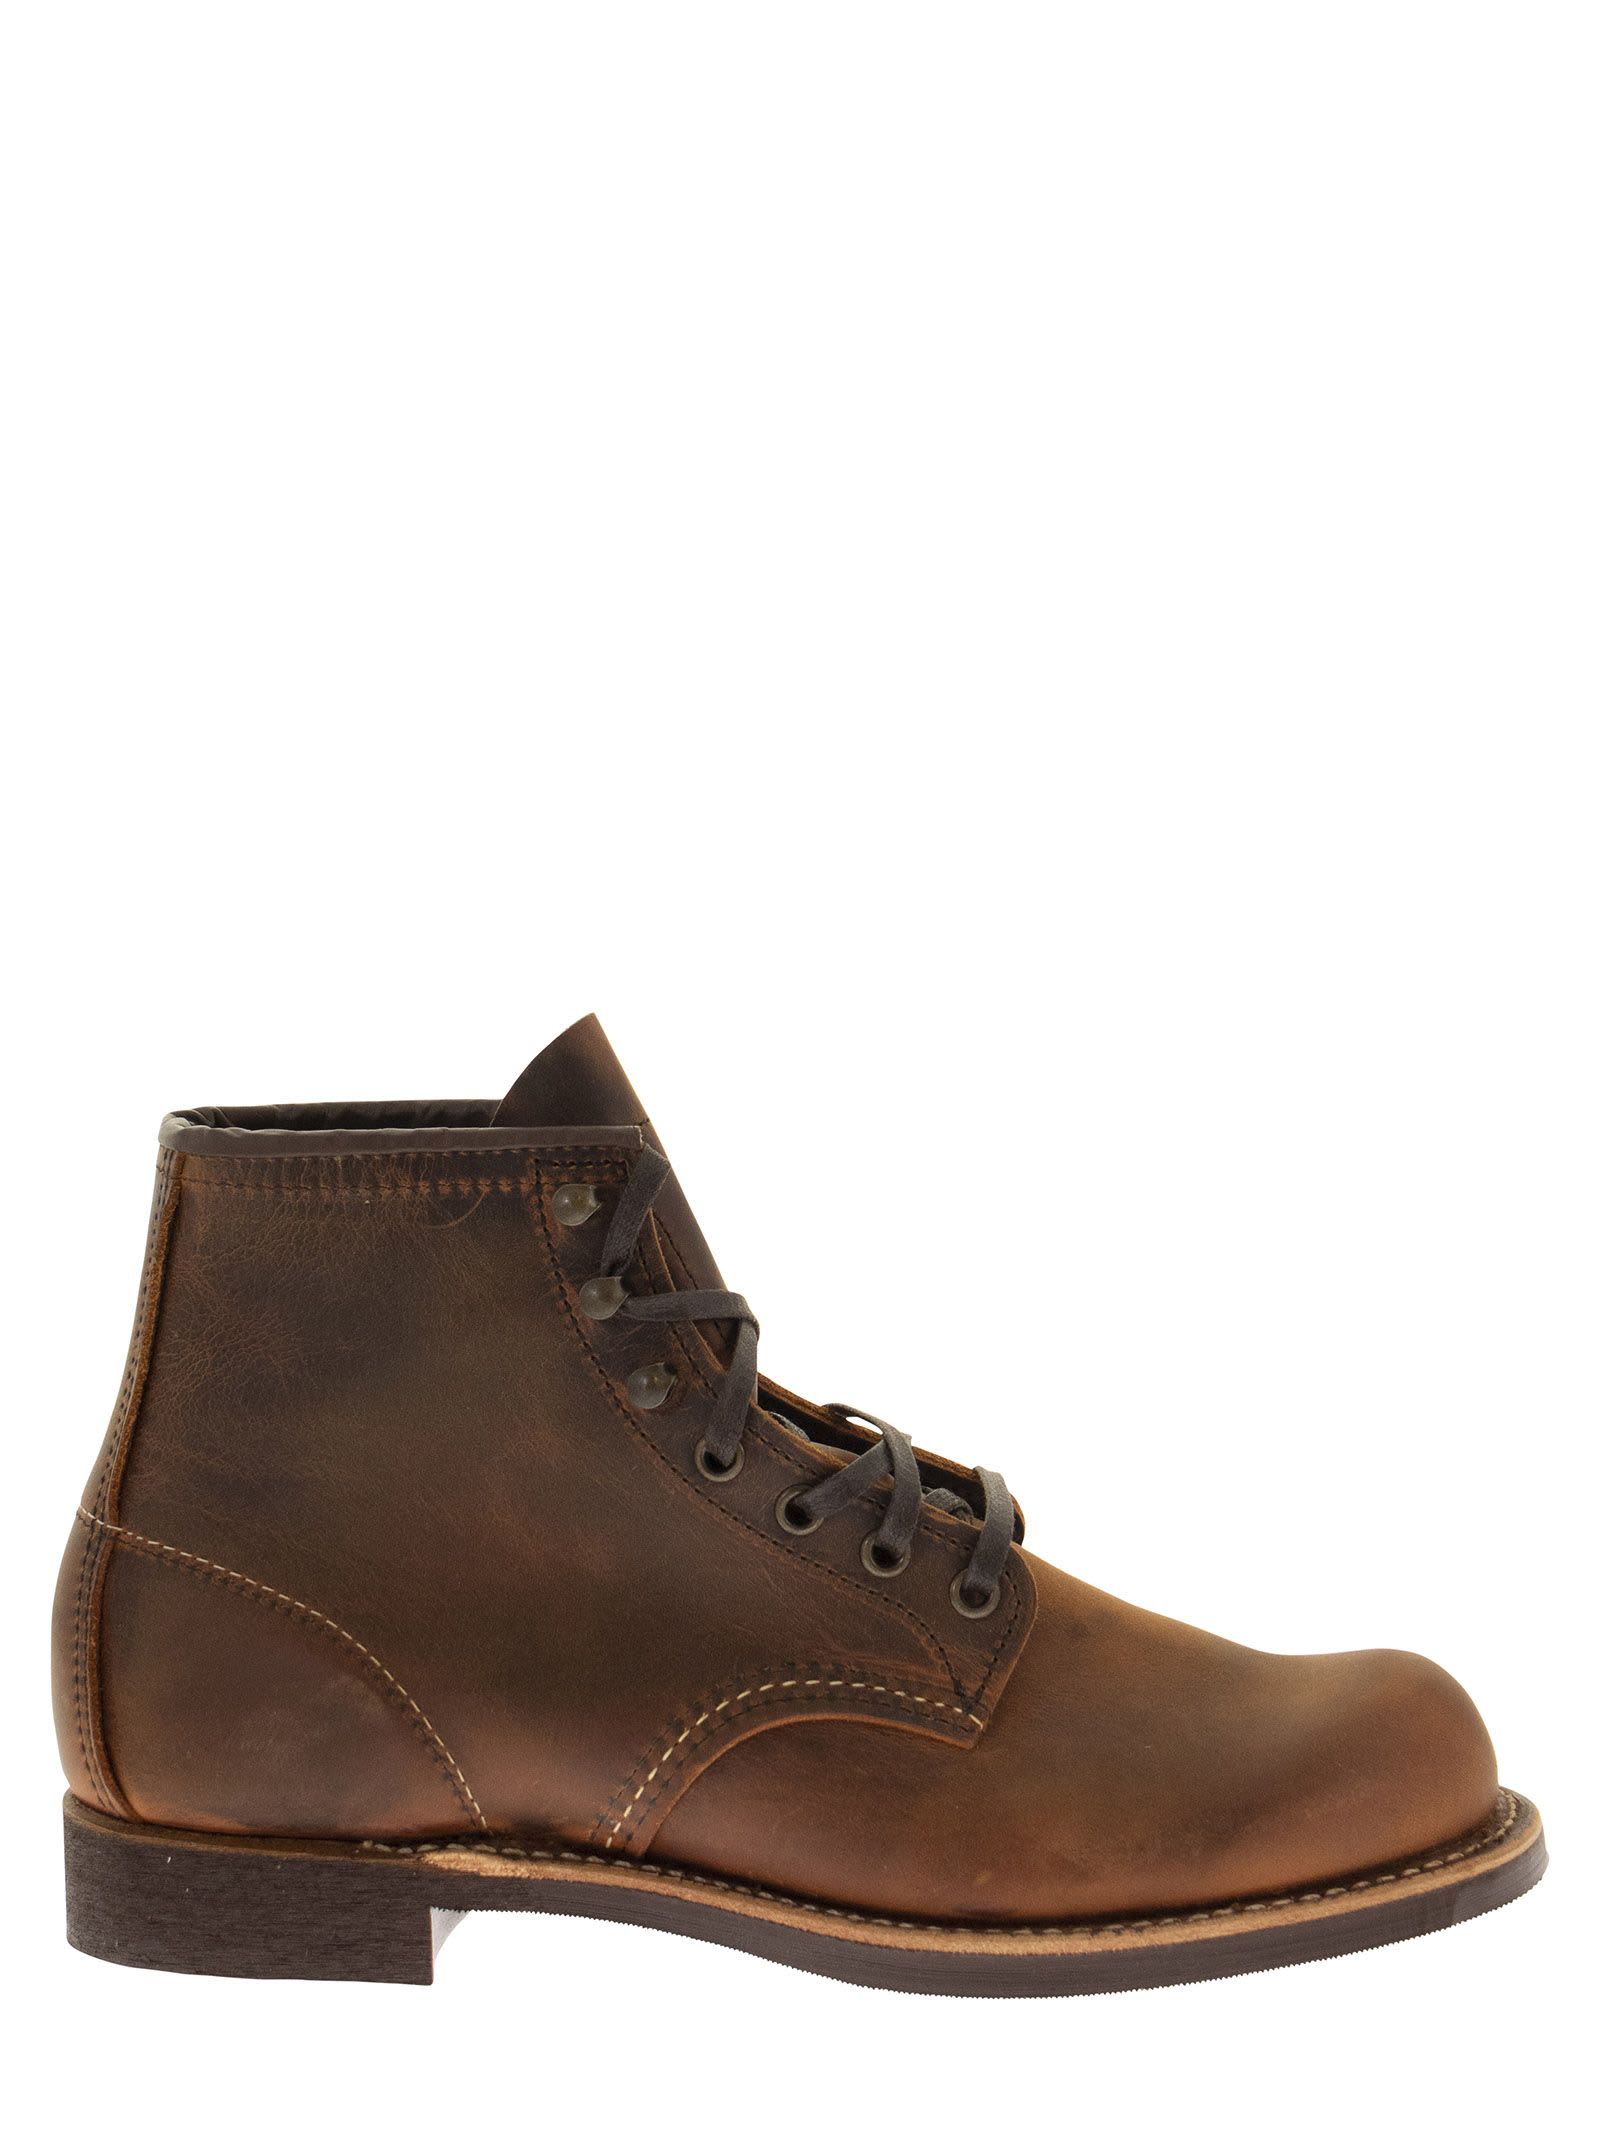 Red Wing 3343 Blacksmith - Lace-up Boot